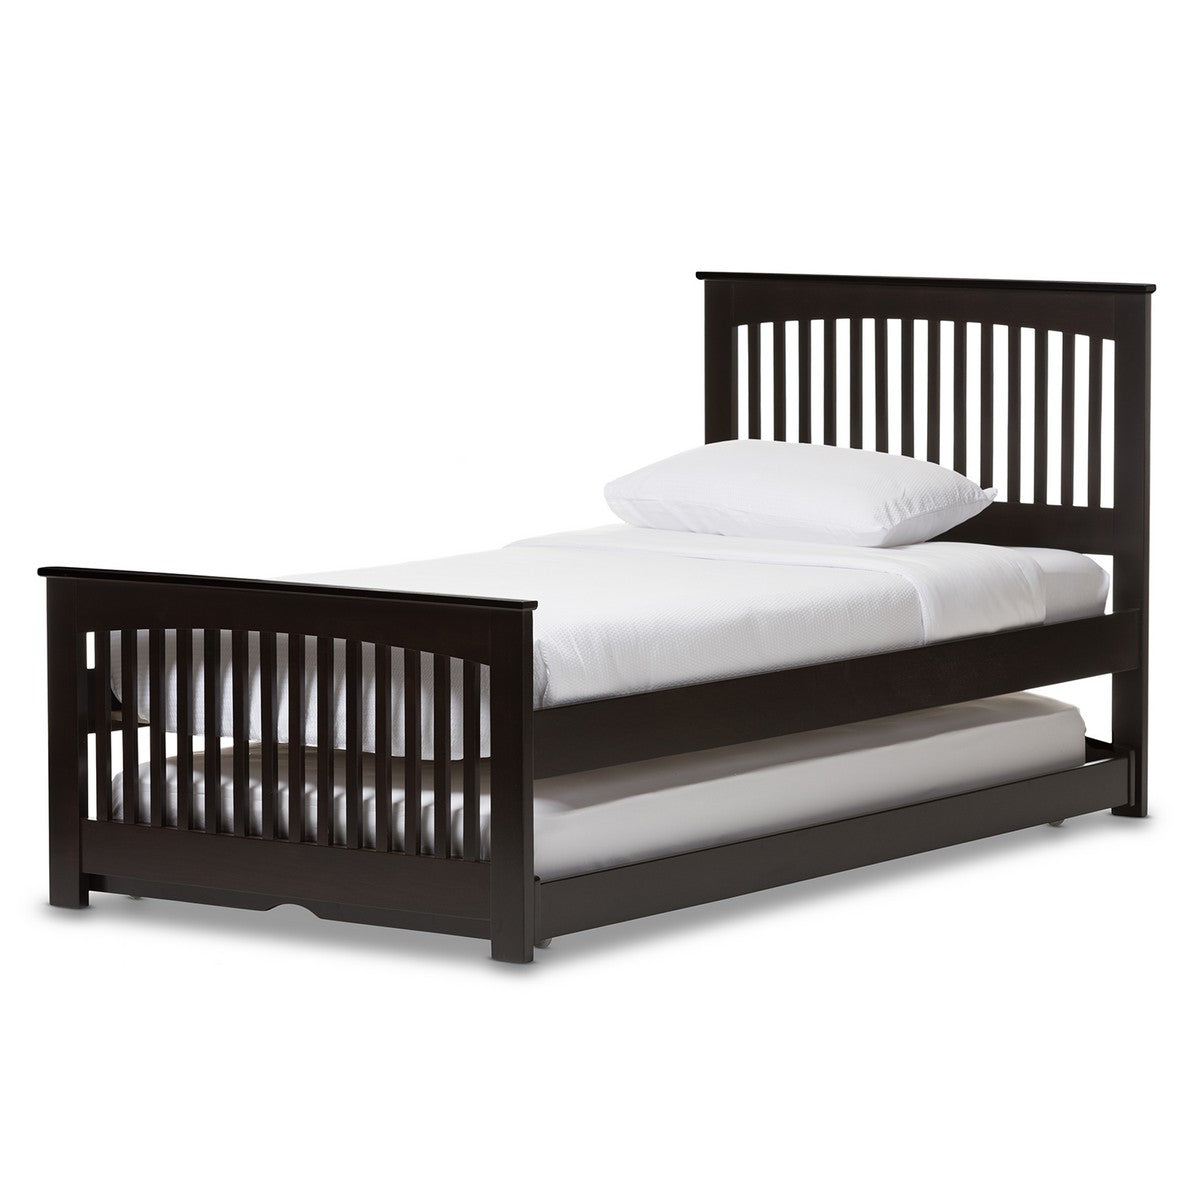 Baxton Studio Hevea Twin Size Dark Brown Solid Wood Platform Bed with Guest Trundle Bed Baxton Studio-beds-Minimal And Modern - 1